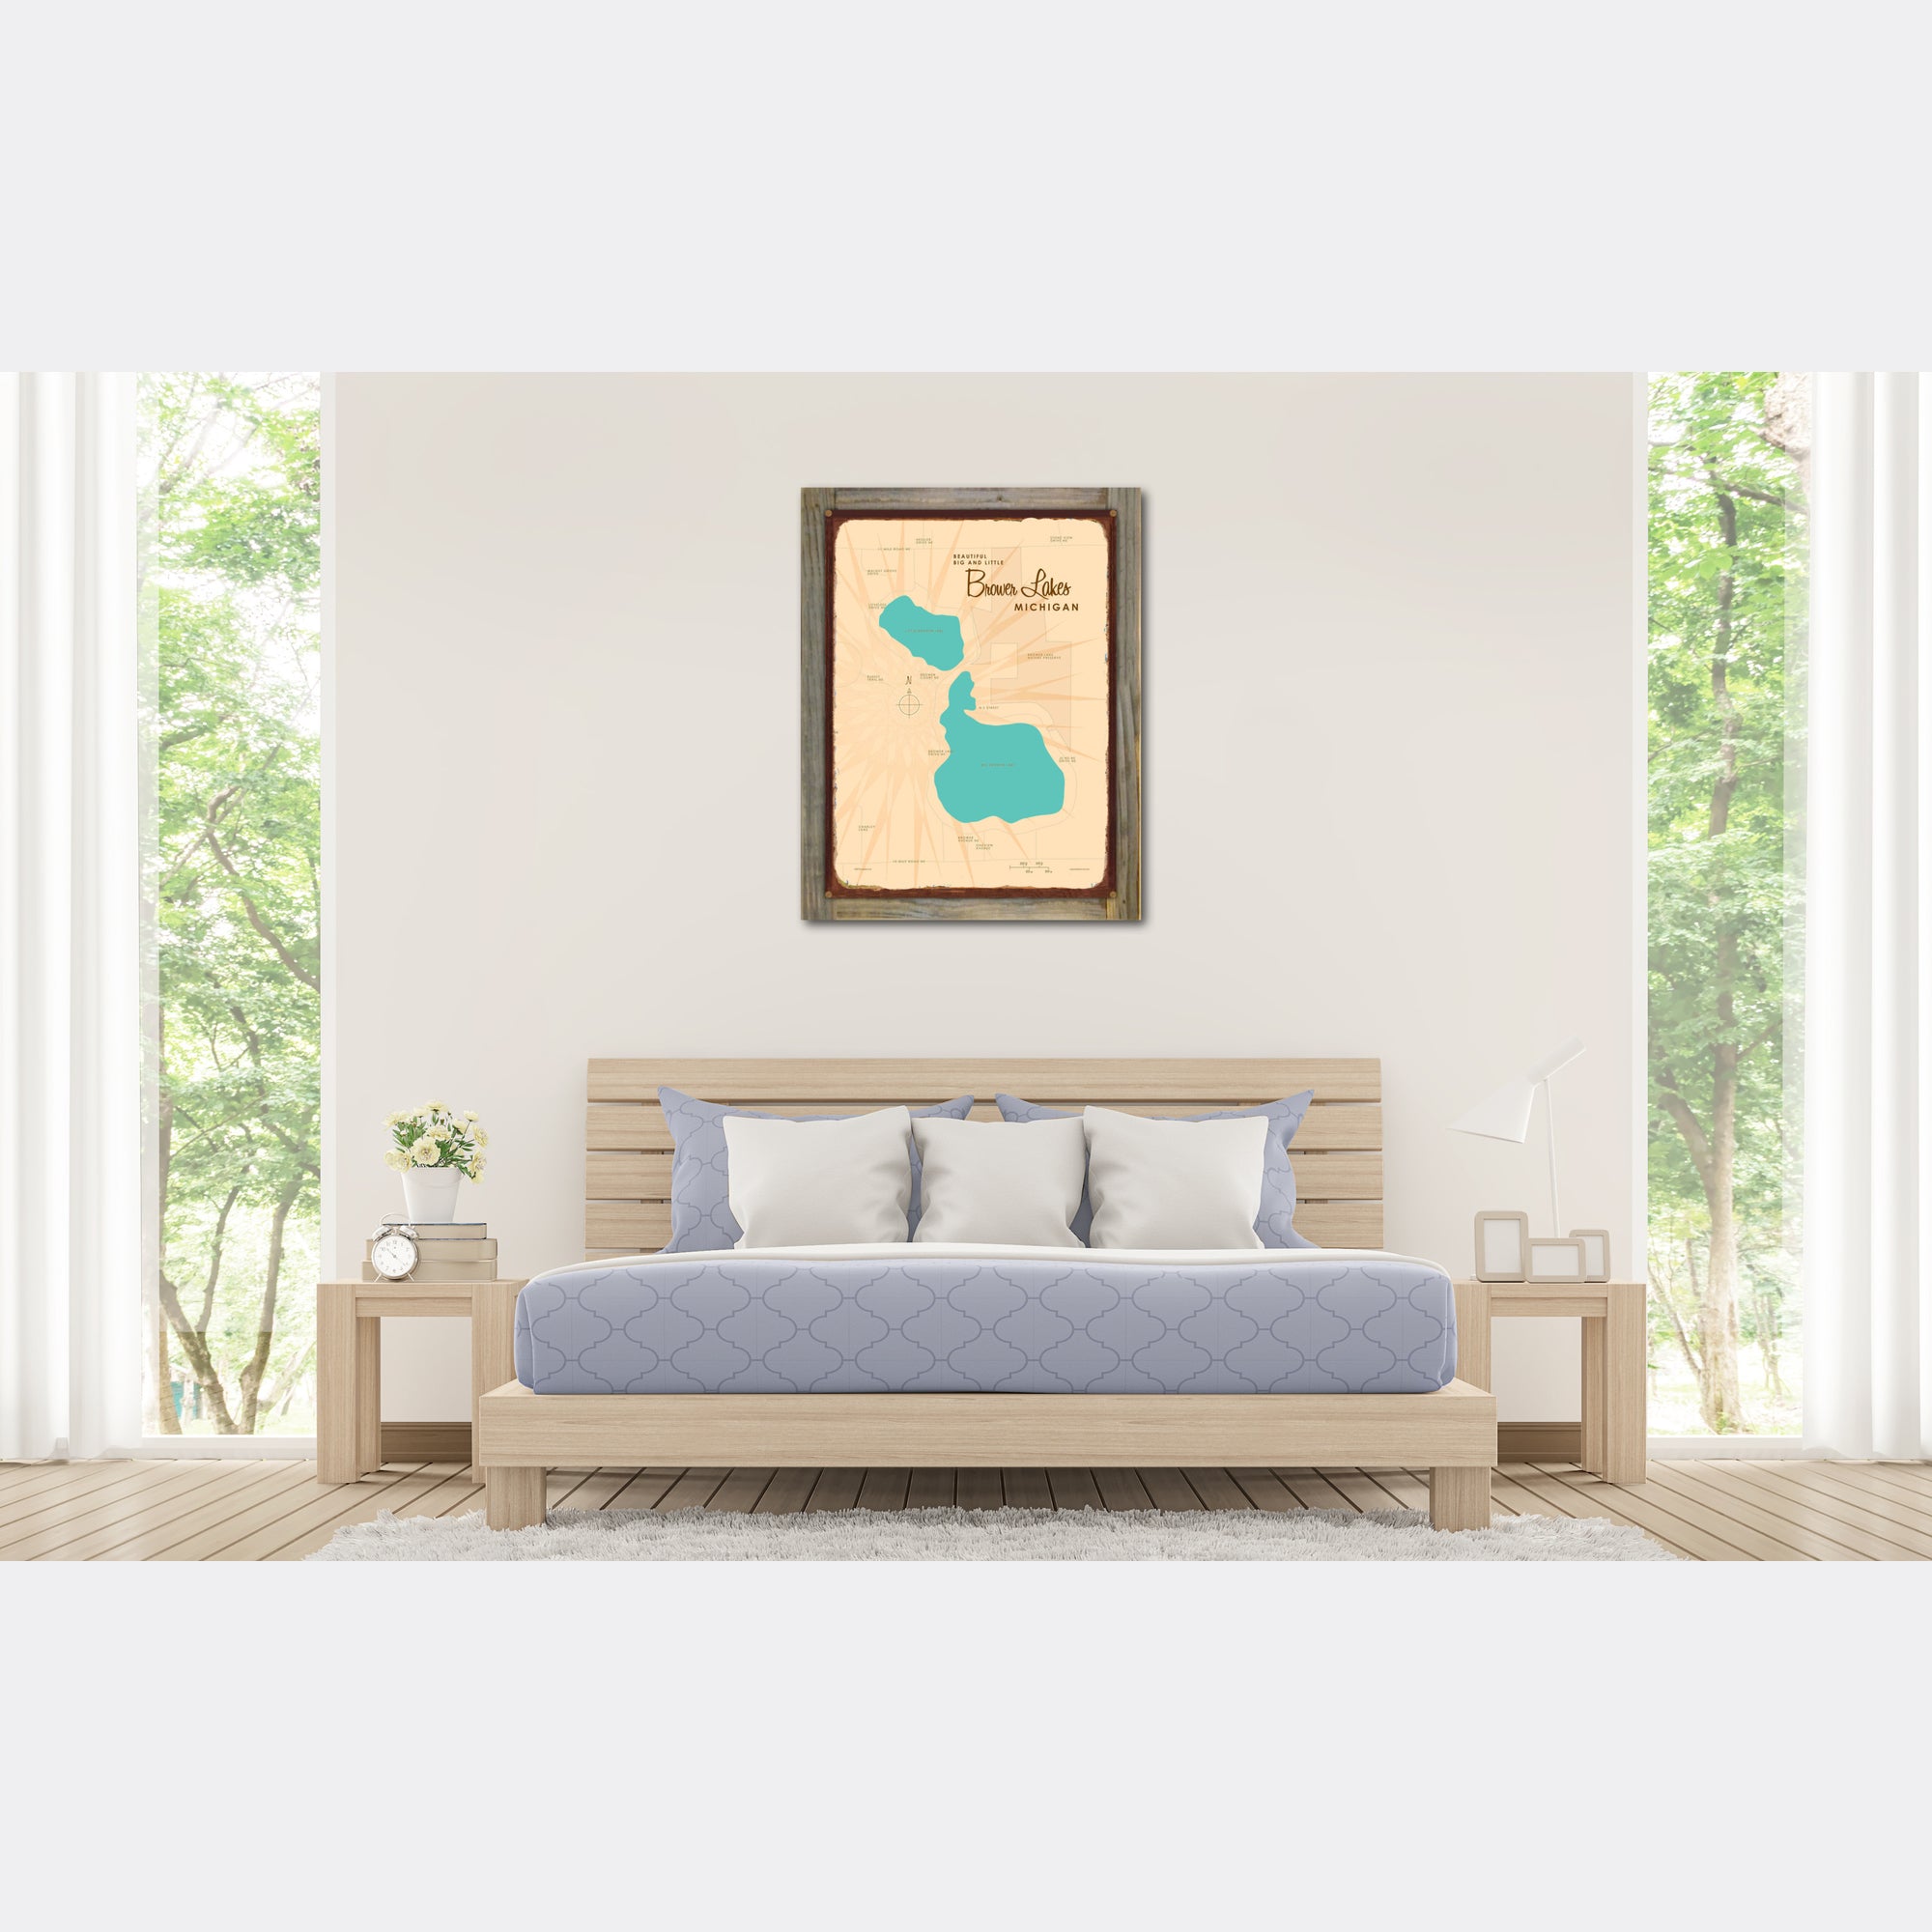 Big and Little Brower Lakes Michigan, Wood-Mounted Rustic Metal Sign Map Art